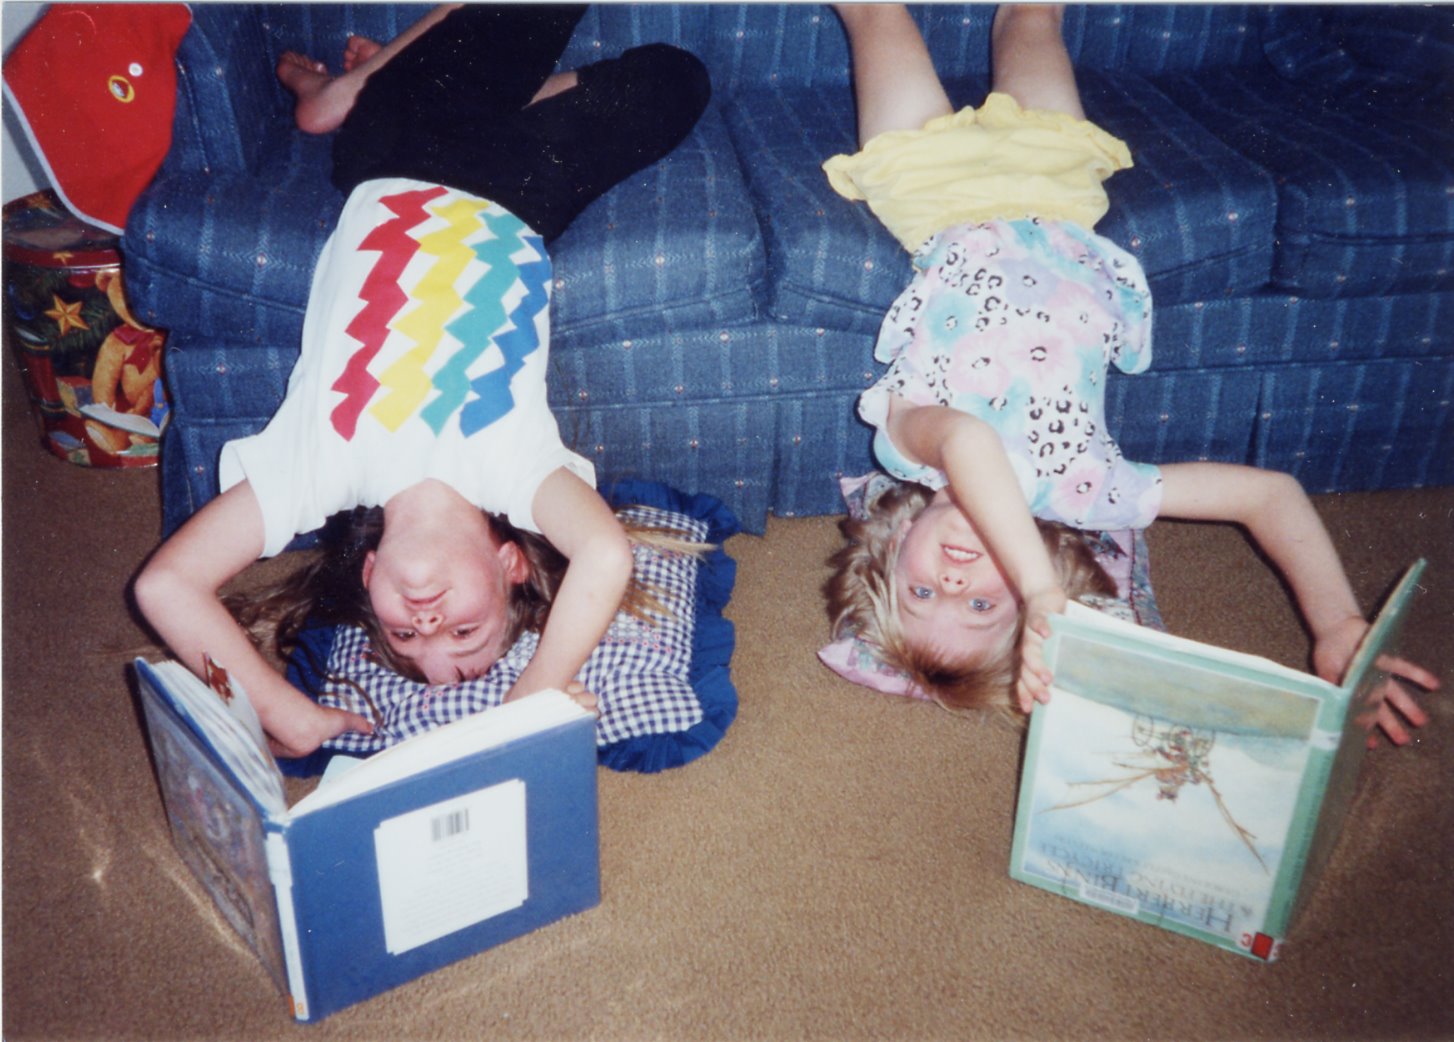 [Amy+and+Mel+upside+down.jpg]